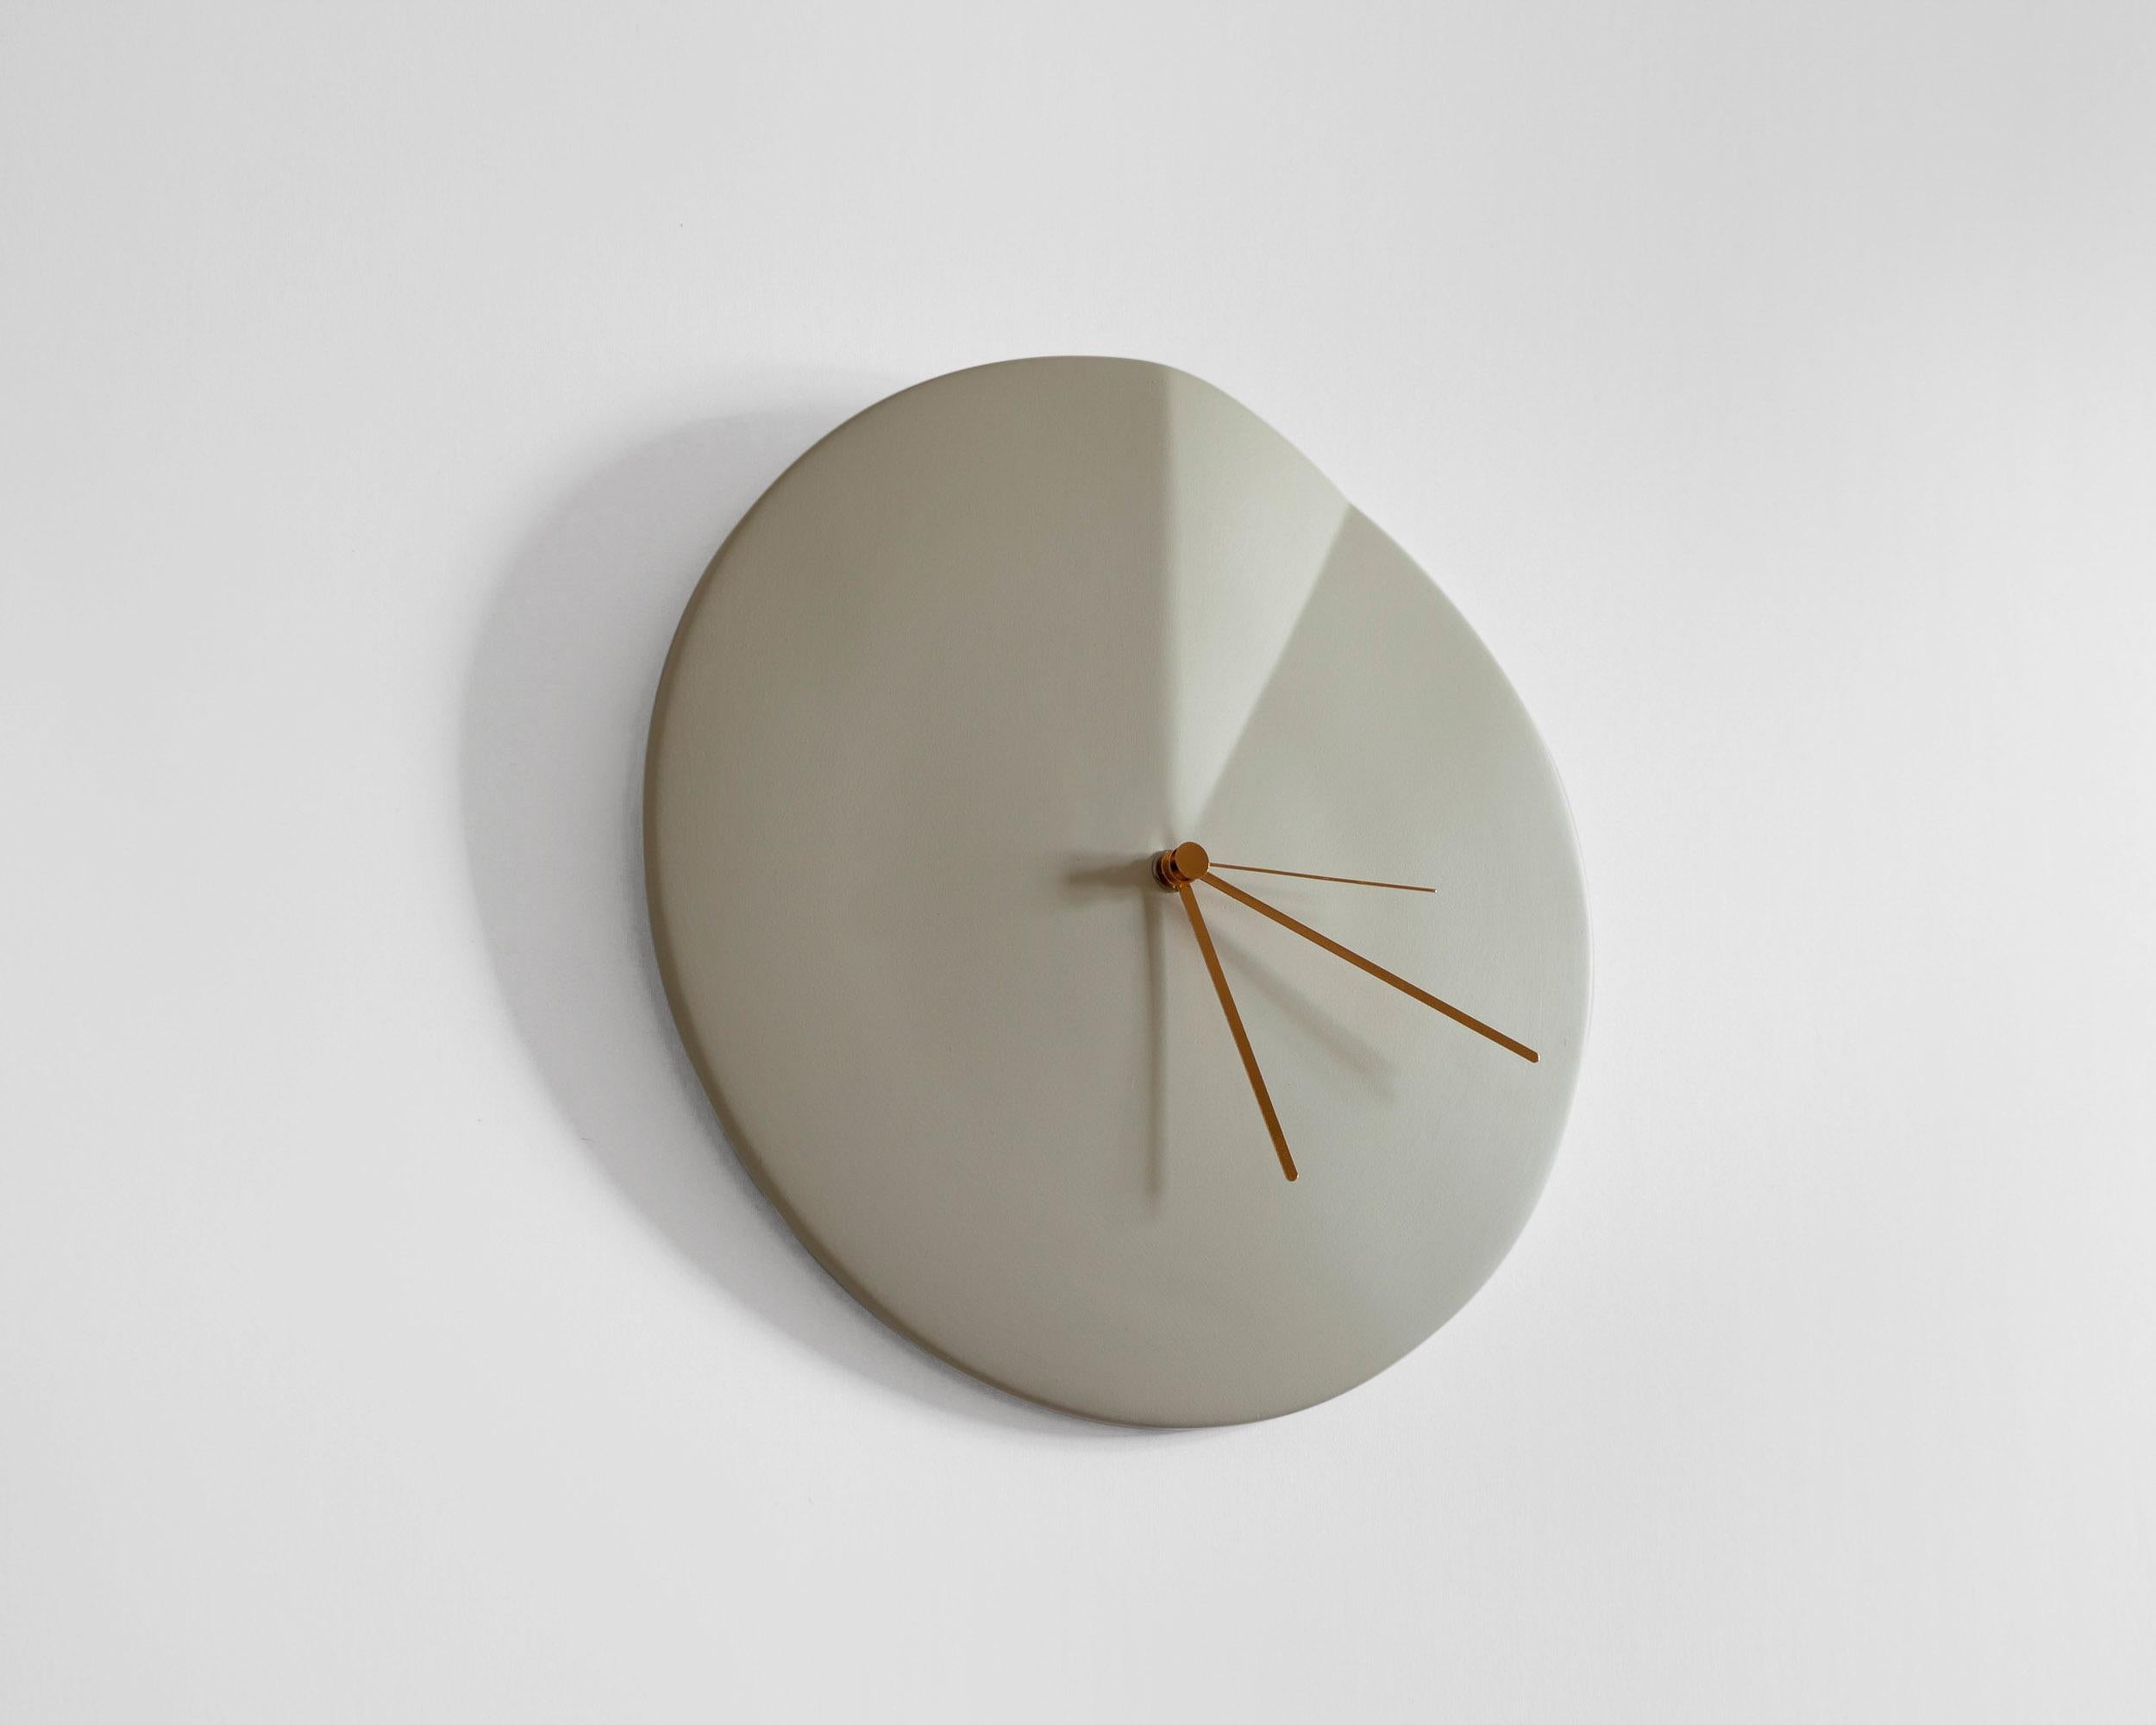 Oree
Wall clock signed by Ocrùm 

Dimensions: 11.75 x 1.5 in
Materials: Painted ceramic and aluminum hands
Colors: 
Cream White / Wine Red / Light Blue / Granite Blue / Light Grey / Antique Pink 
Hands: Copper / Grey
Movement:
Silent